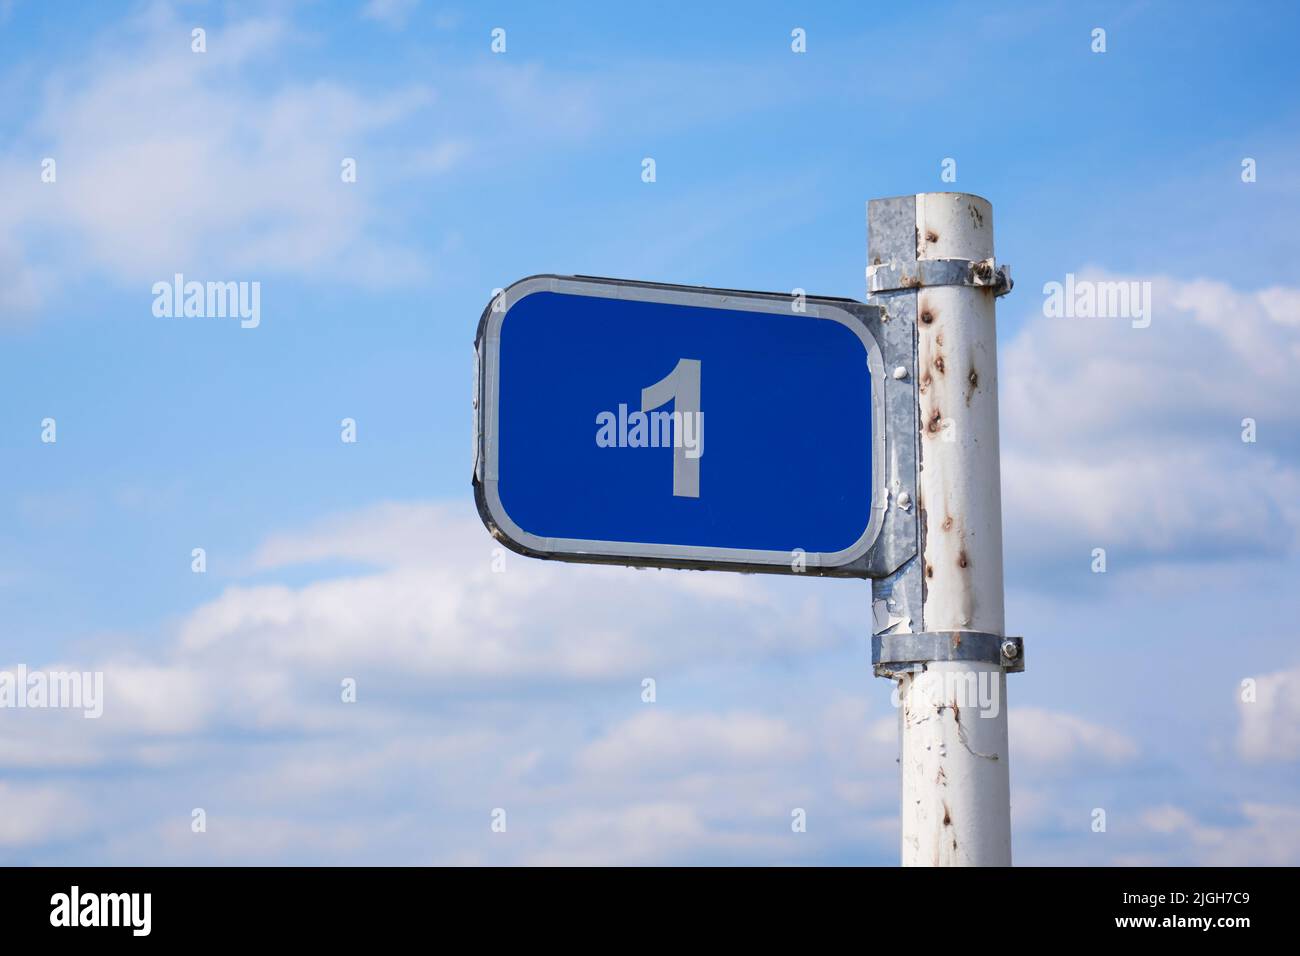 Road sign 1 km against the blue sky with white clouds Stock Photo